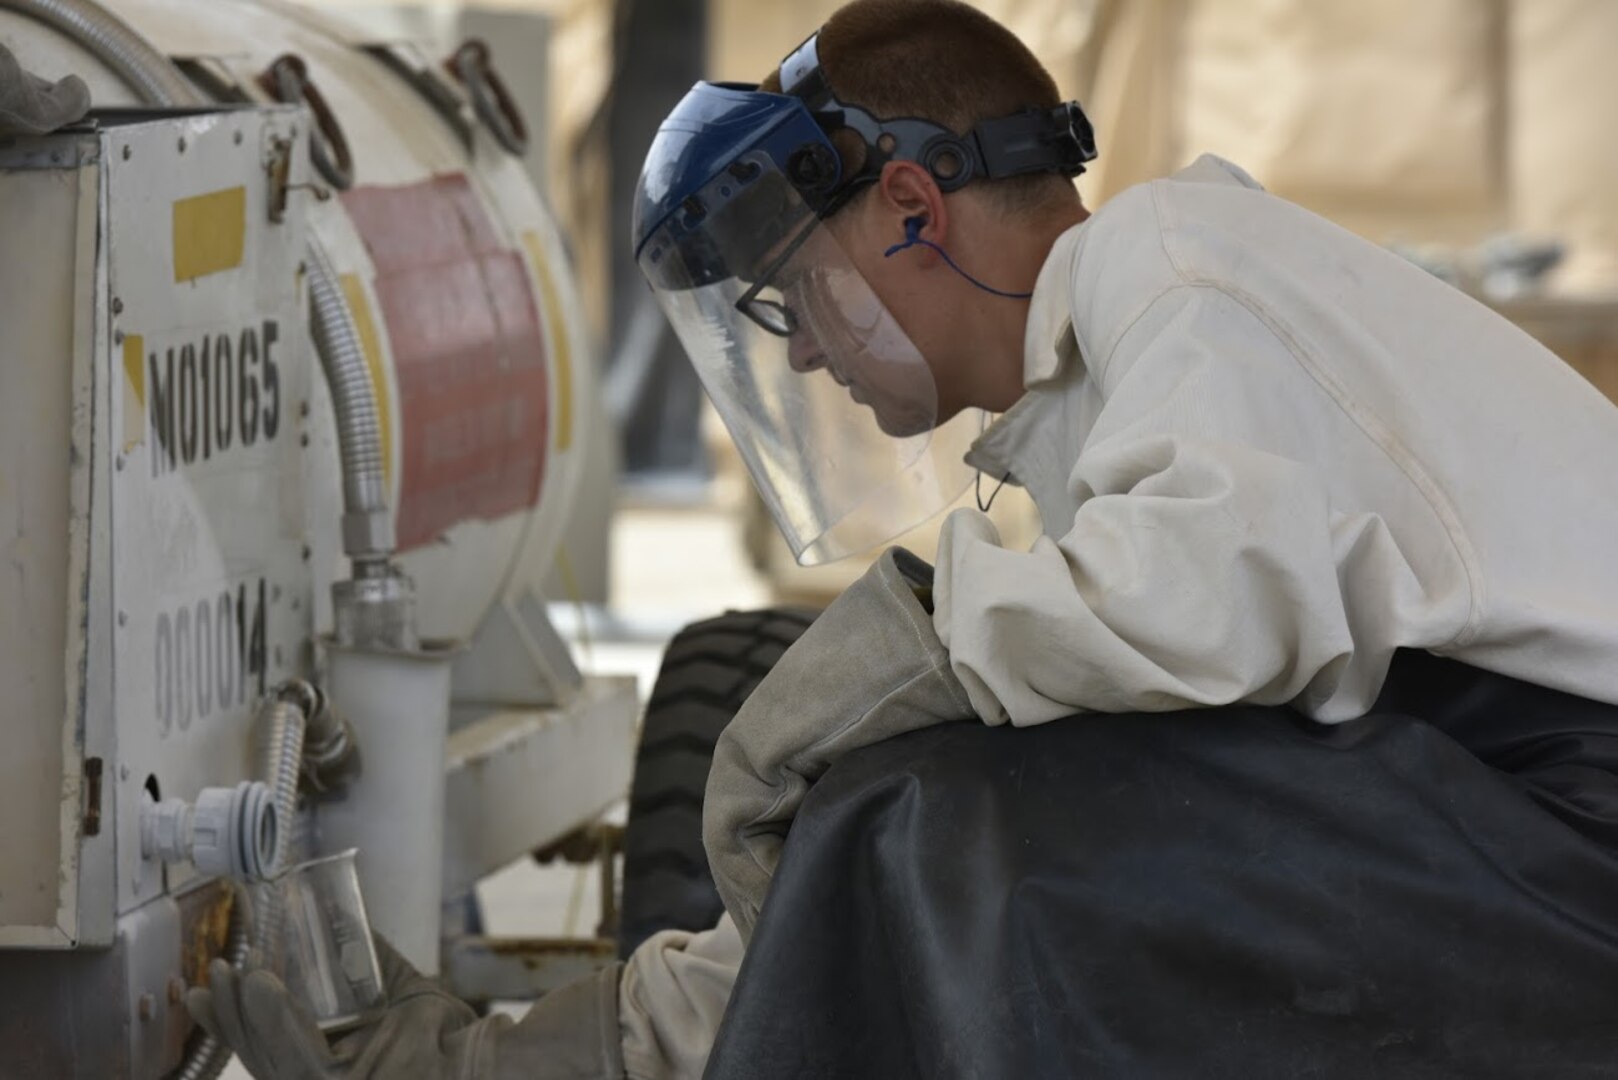 Airman 1st Class Jordan Mann, 407th Expeditionary Logistic Readiness Squadron petroleum, oil and lubricants flight fuel technician, gathers a sample of liquid oxygen after filling a portable tank May 10, 2017, in Southwest Asia. Fuel technicians maintain all POL substances, from diesel and gasoline to jet fuel and liquid oxygen. These materials play a vital role in delivering airpower to the fight against ISIS. The team here at the 407th Air Expeditionary Group supplies U.S. Marine Corps and coalition aircraft. (U.S. Air Force photo by Senior Airman Ramon A. Adelan)